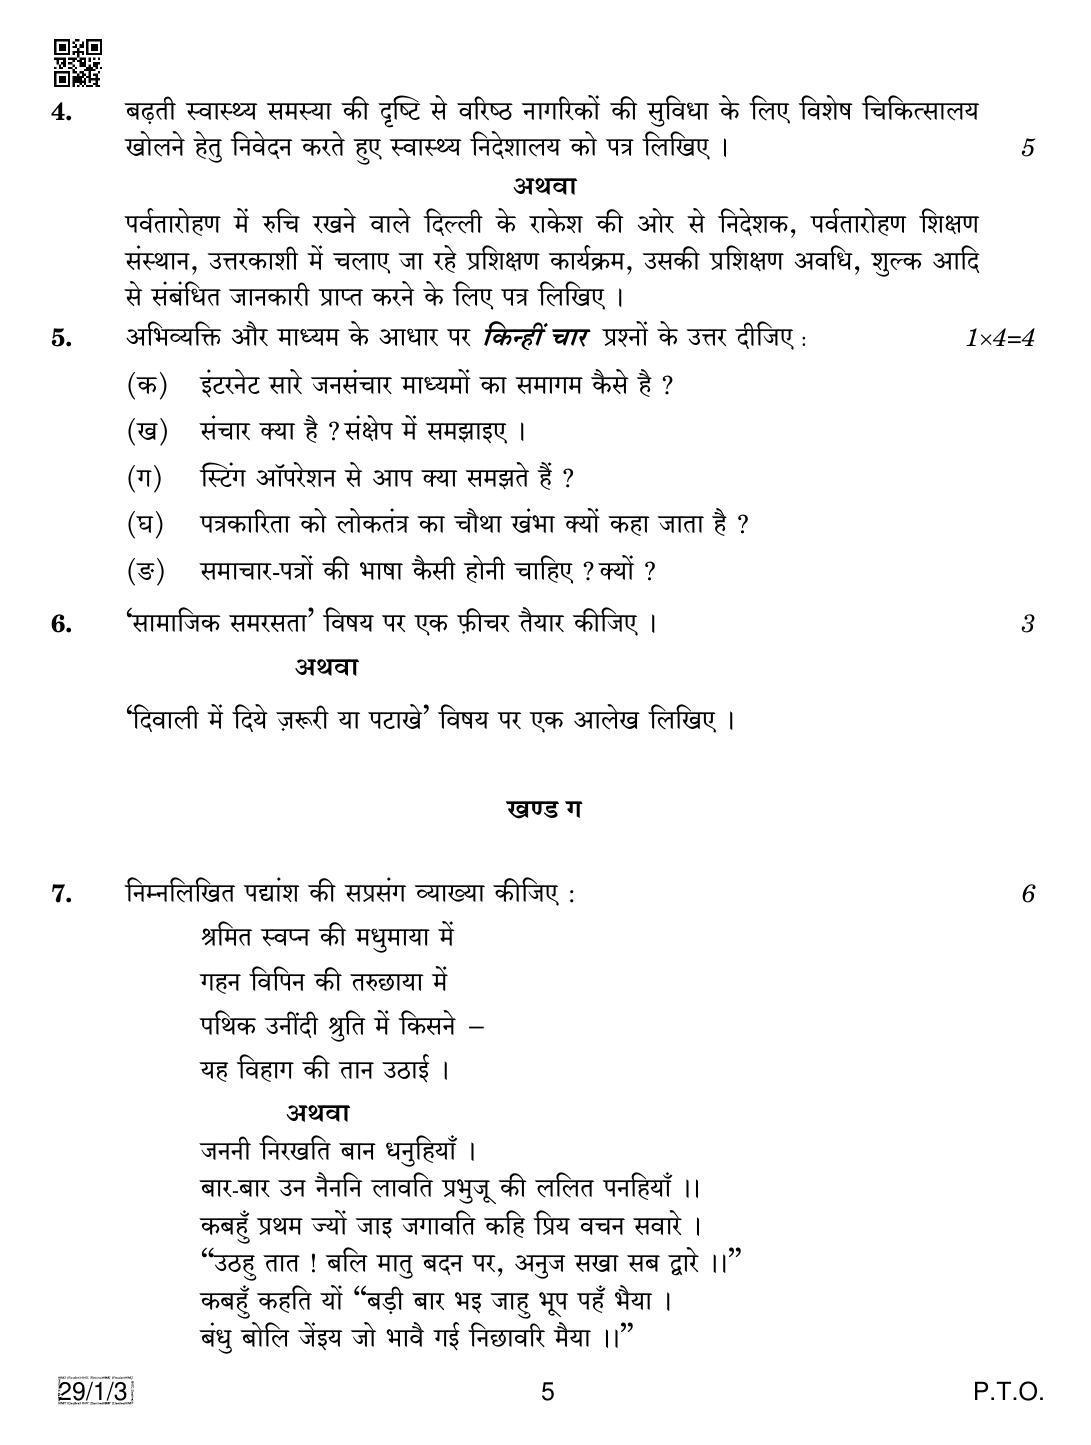 CBSE Class 12 29-1-3 HINDI ELECTIVE 2019 Compartment Question Paper - Page 5